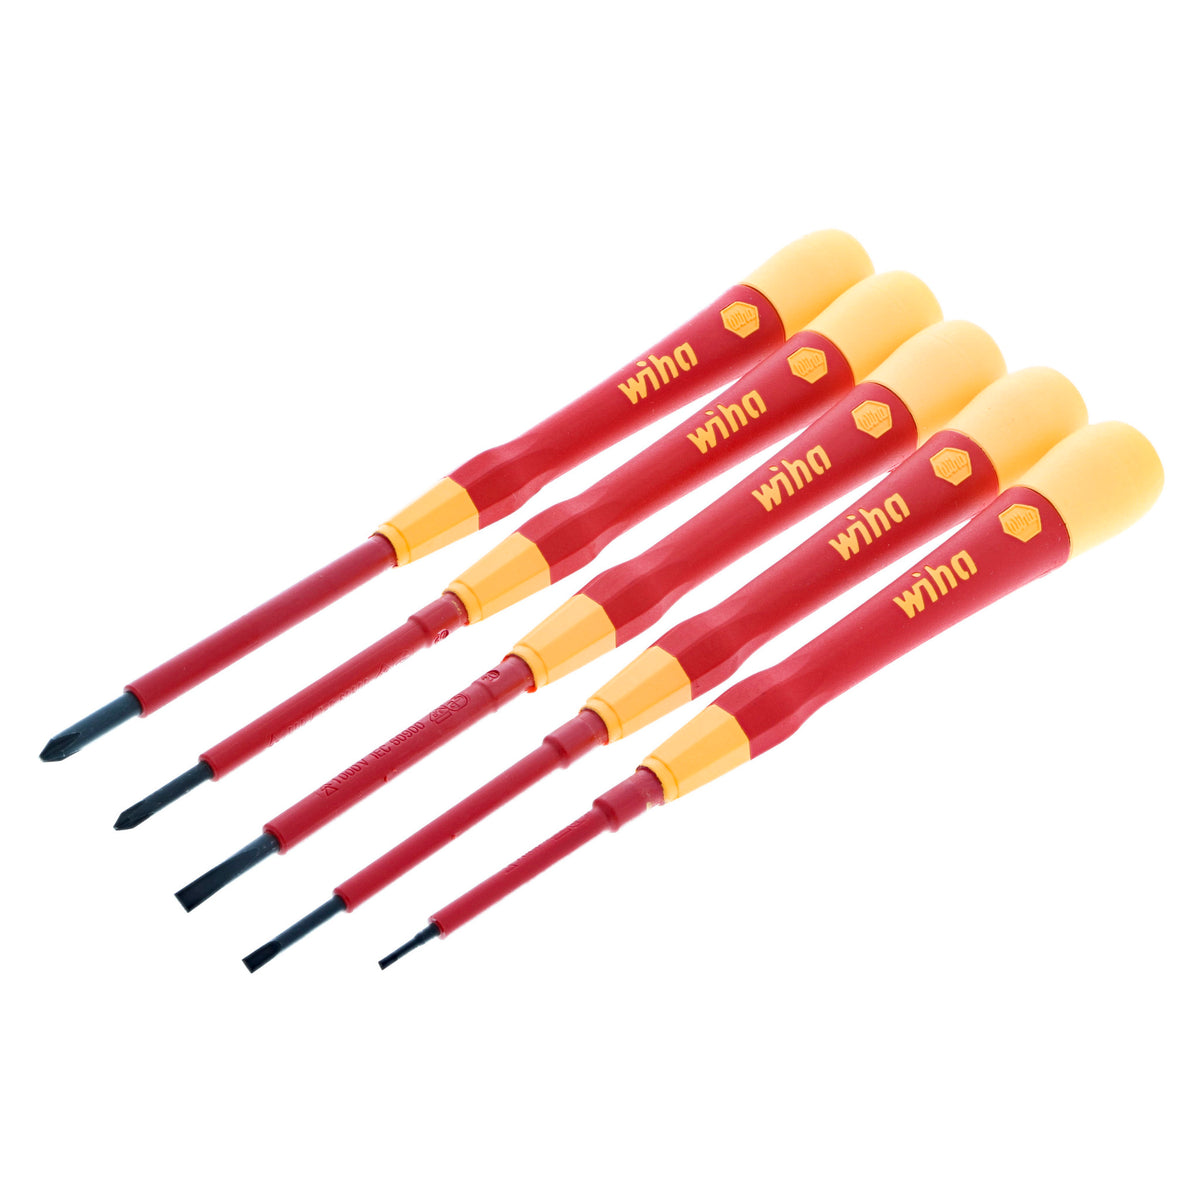 Wiha 32005 Insulated Slotted Screwdriver 2.0mm Made in Germany